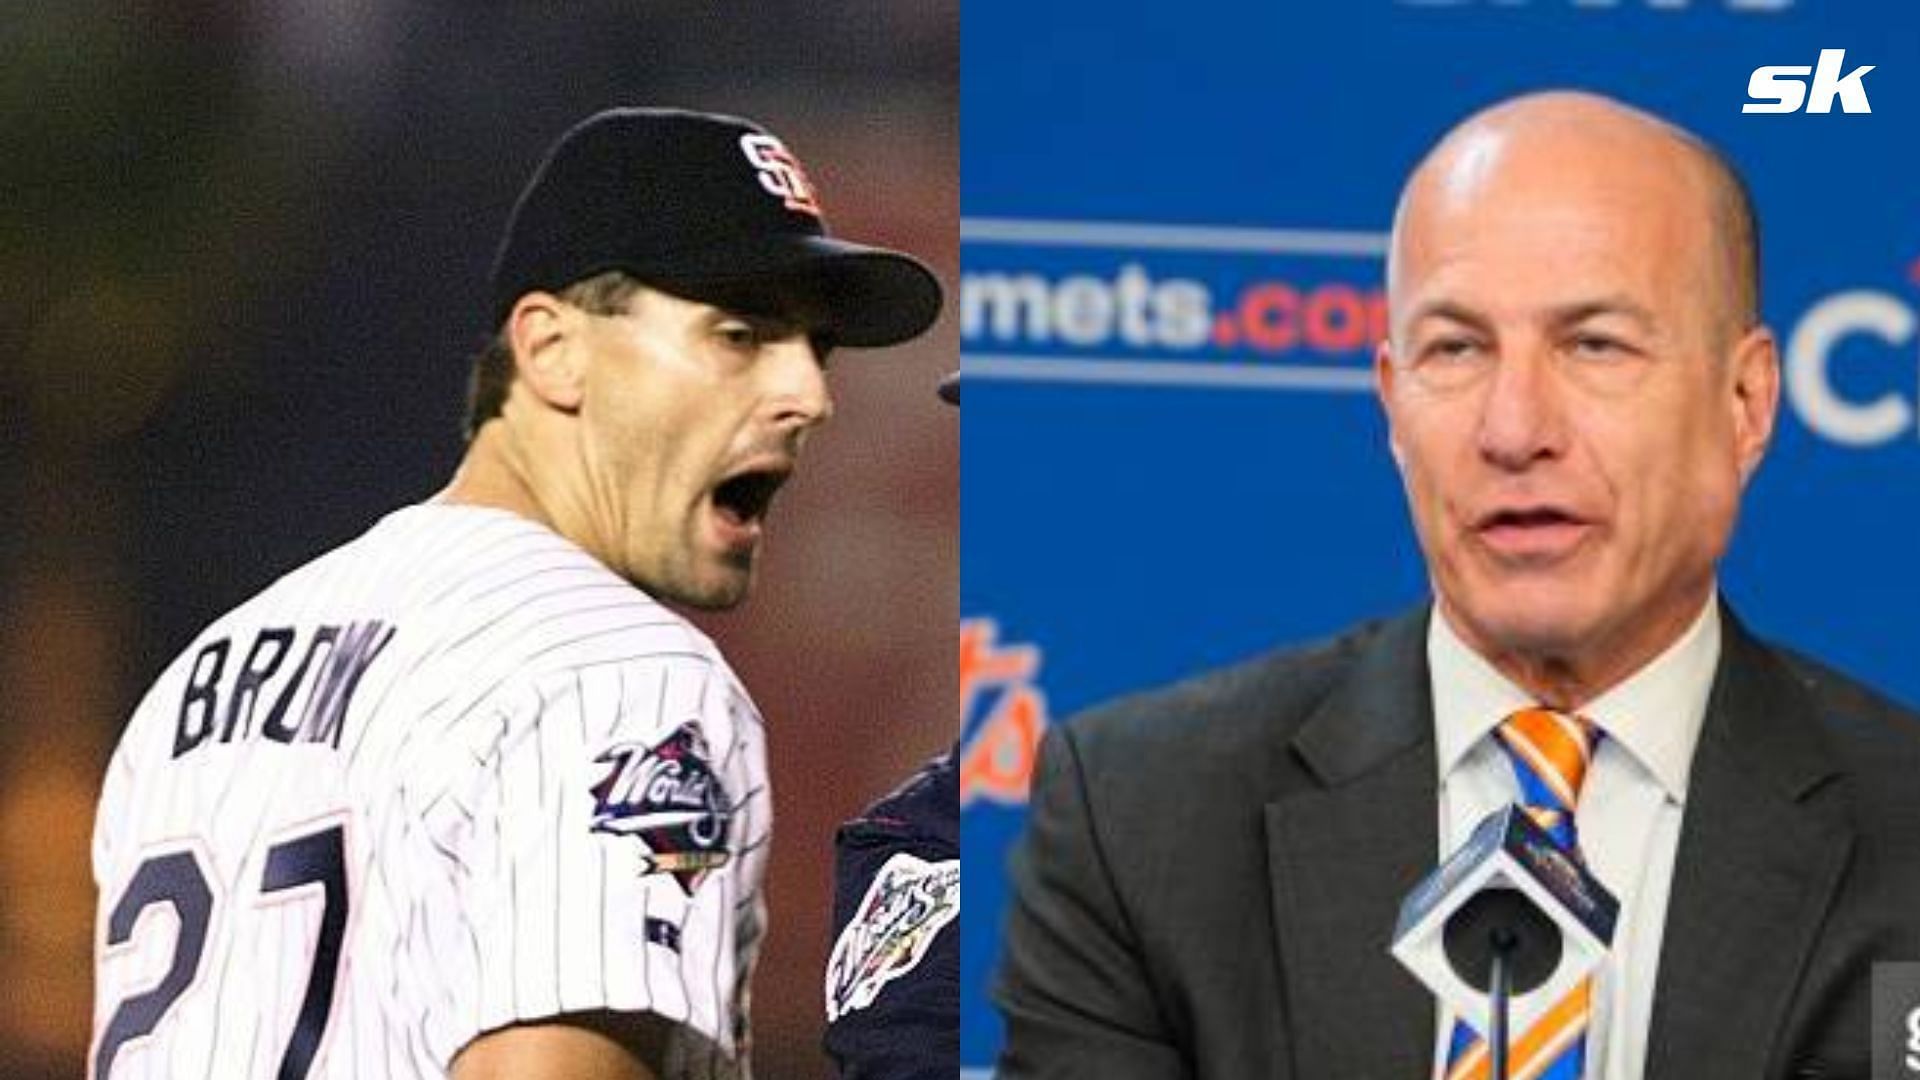 Watch: Mets Broadcaster Gary Cohen slams the Orioles Organization for suspending Kevin Brown